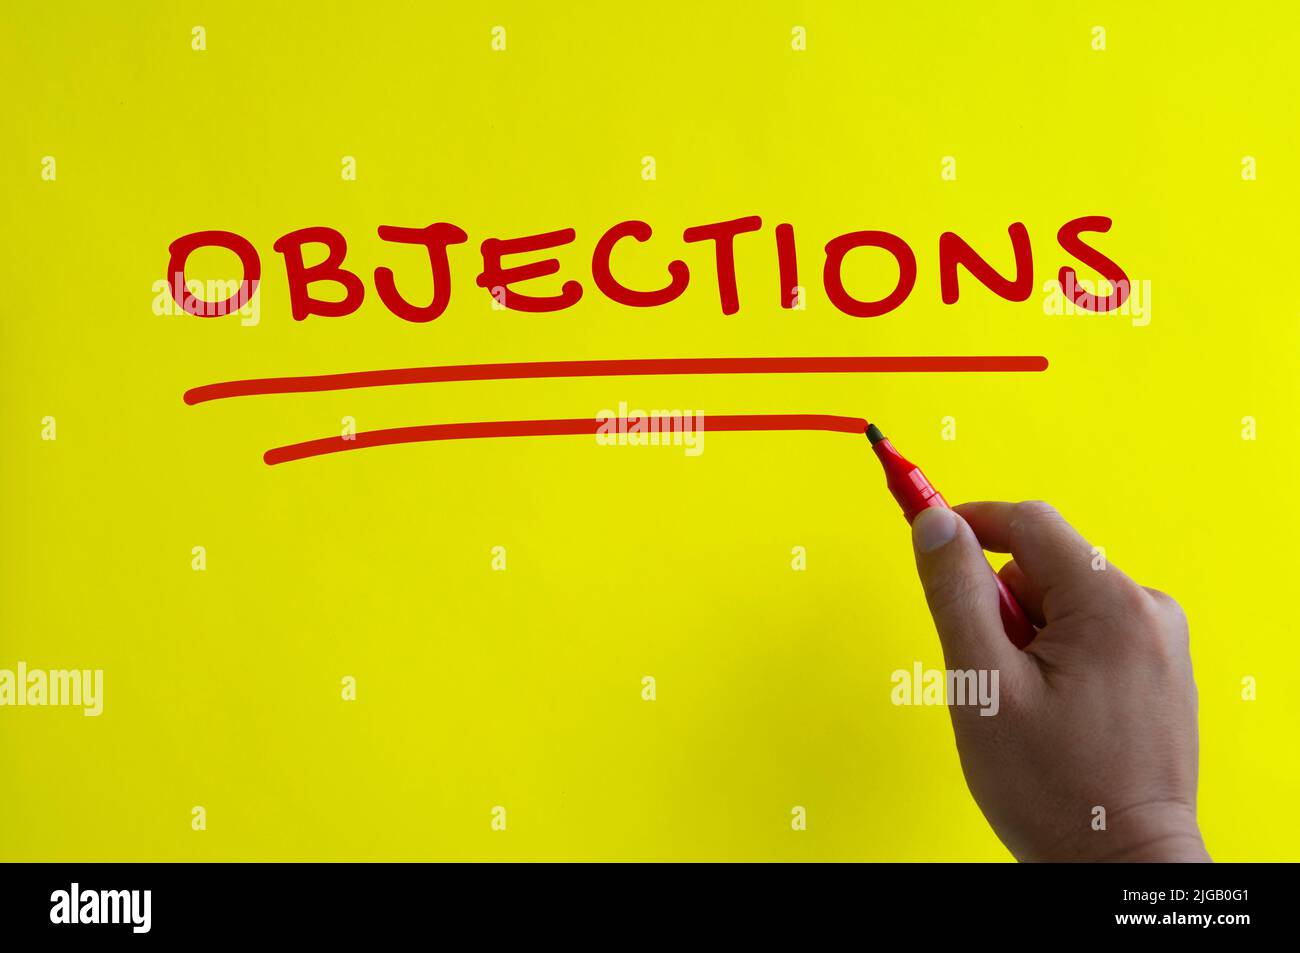 Hand writing objections text on yellow background. Objections concept Stock Photo